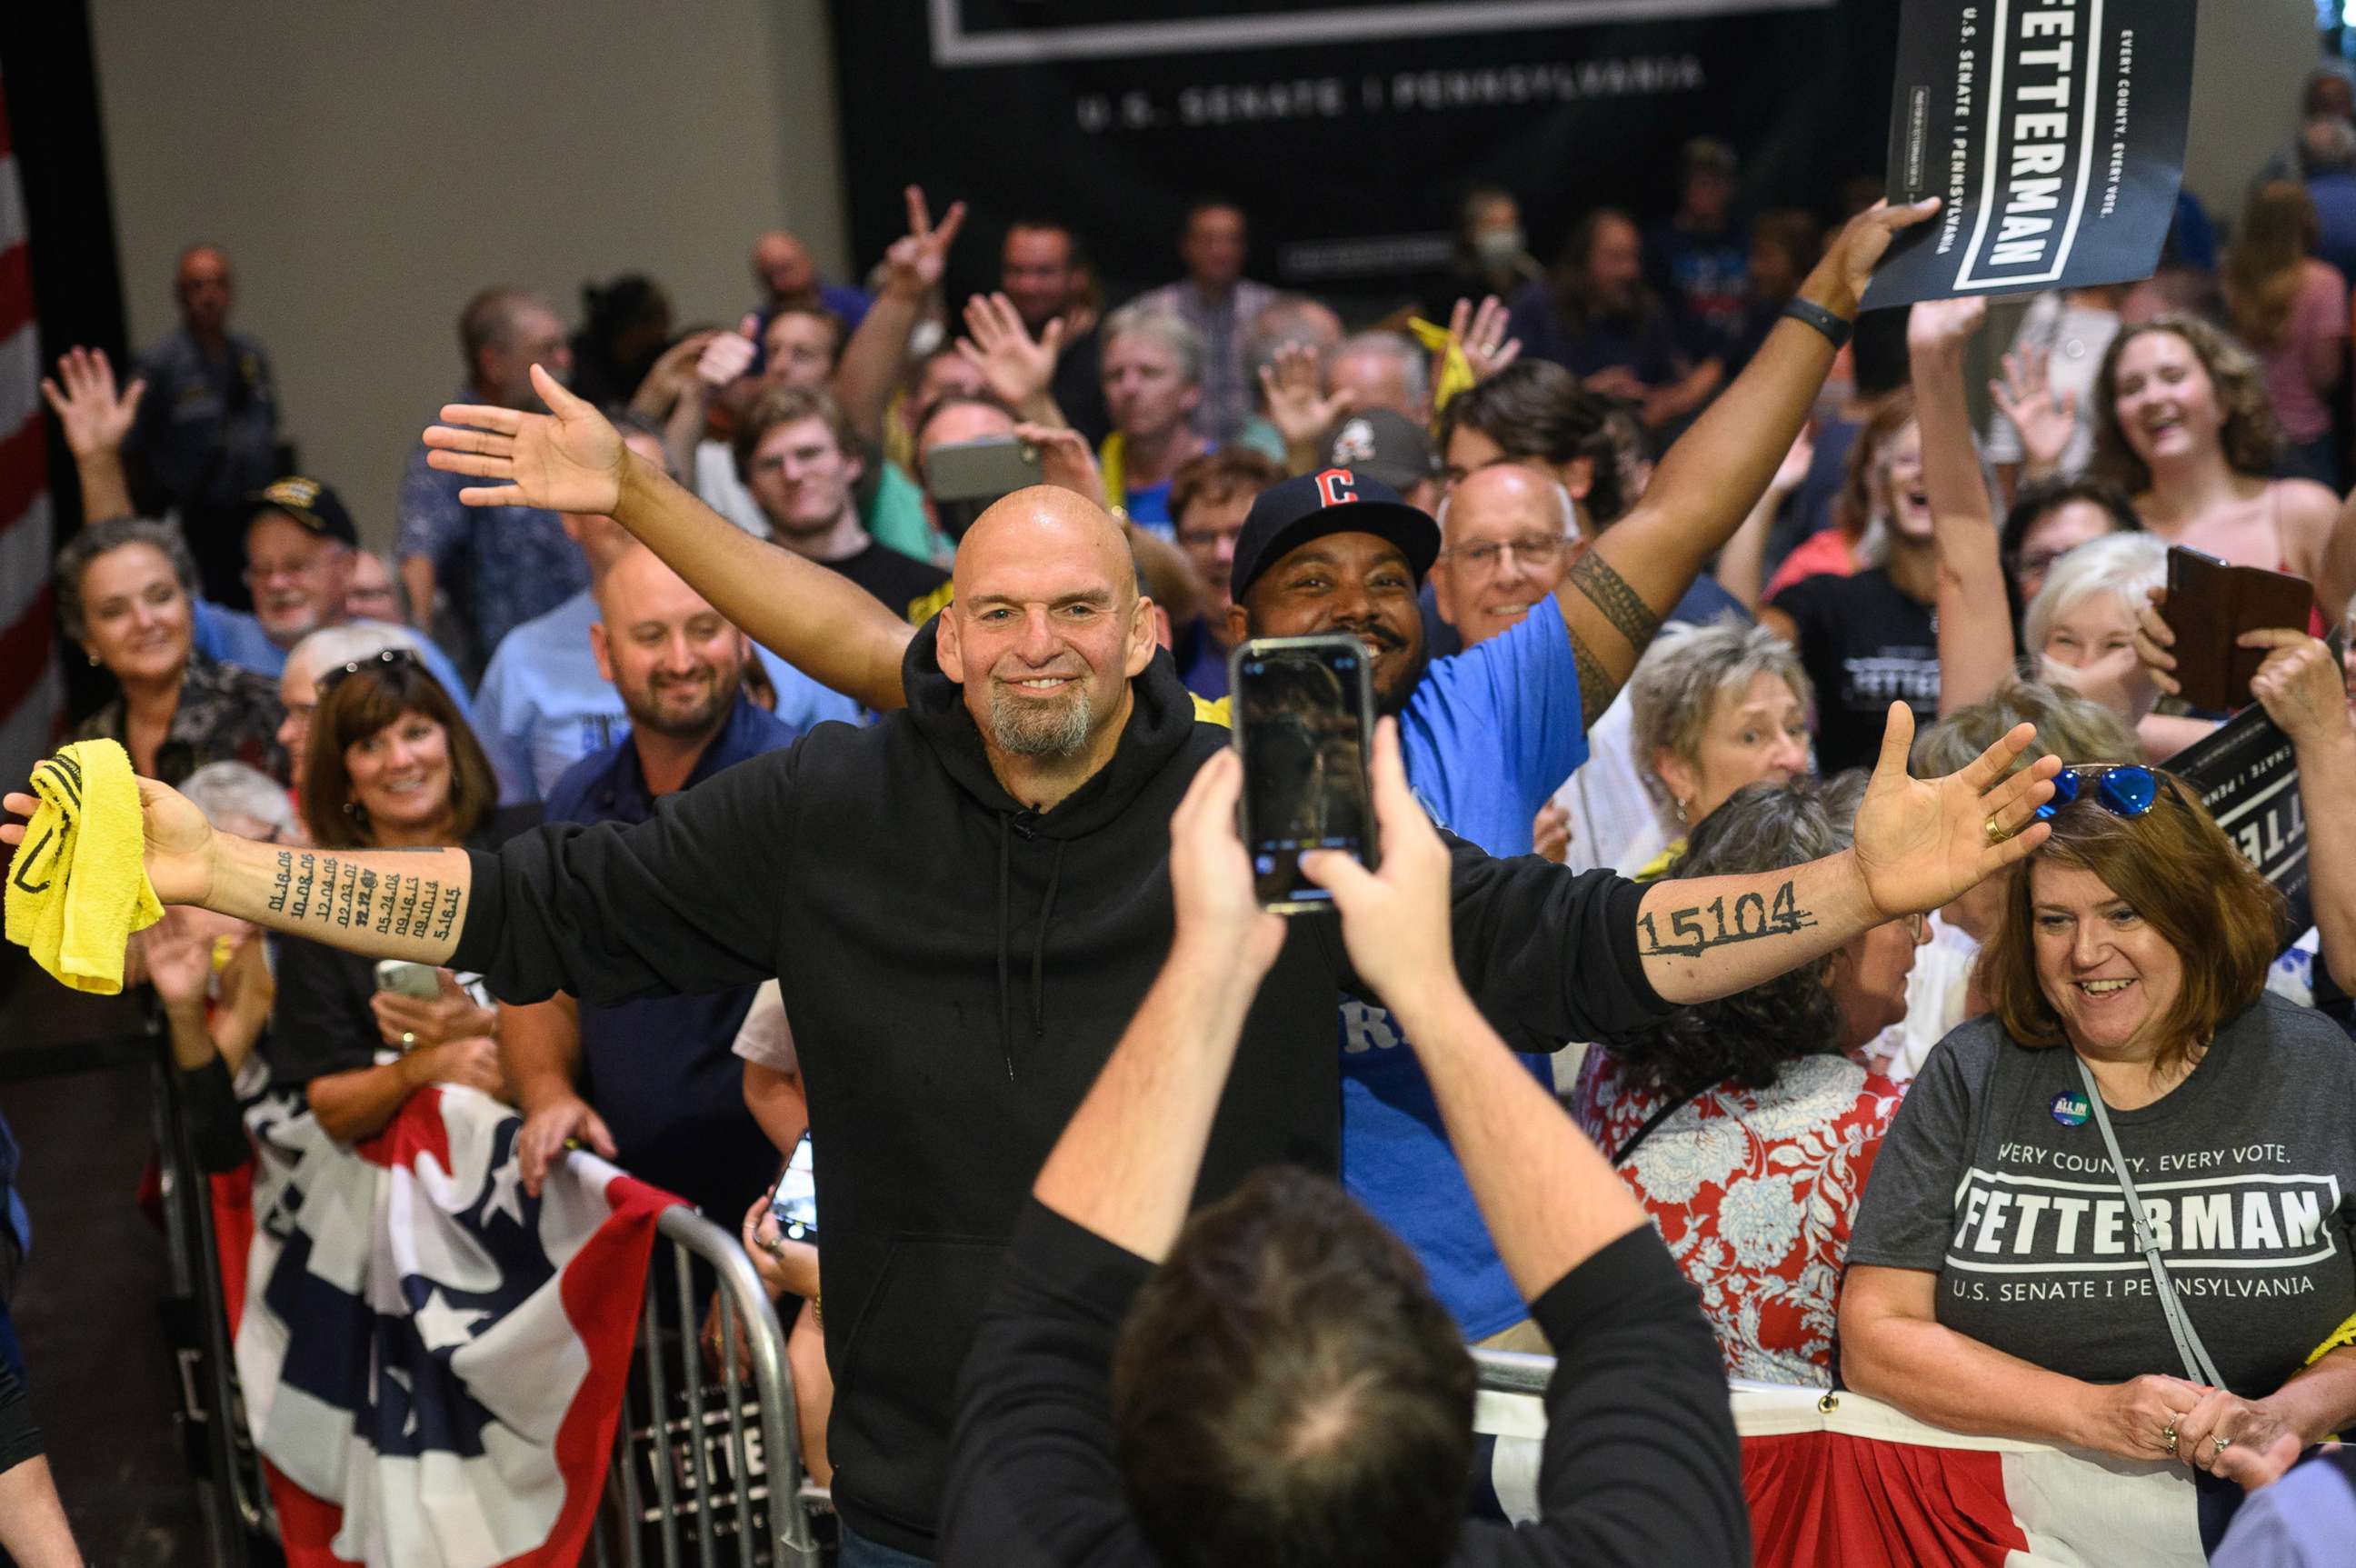 PHOTO: John Fetterman, lieutenant governor of Pennsylvania and Democratic senate candidate, takes a photo with attendees after a campaign rally in Erie, Pa., Aug. 12, 2022.